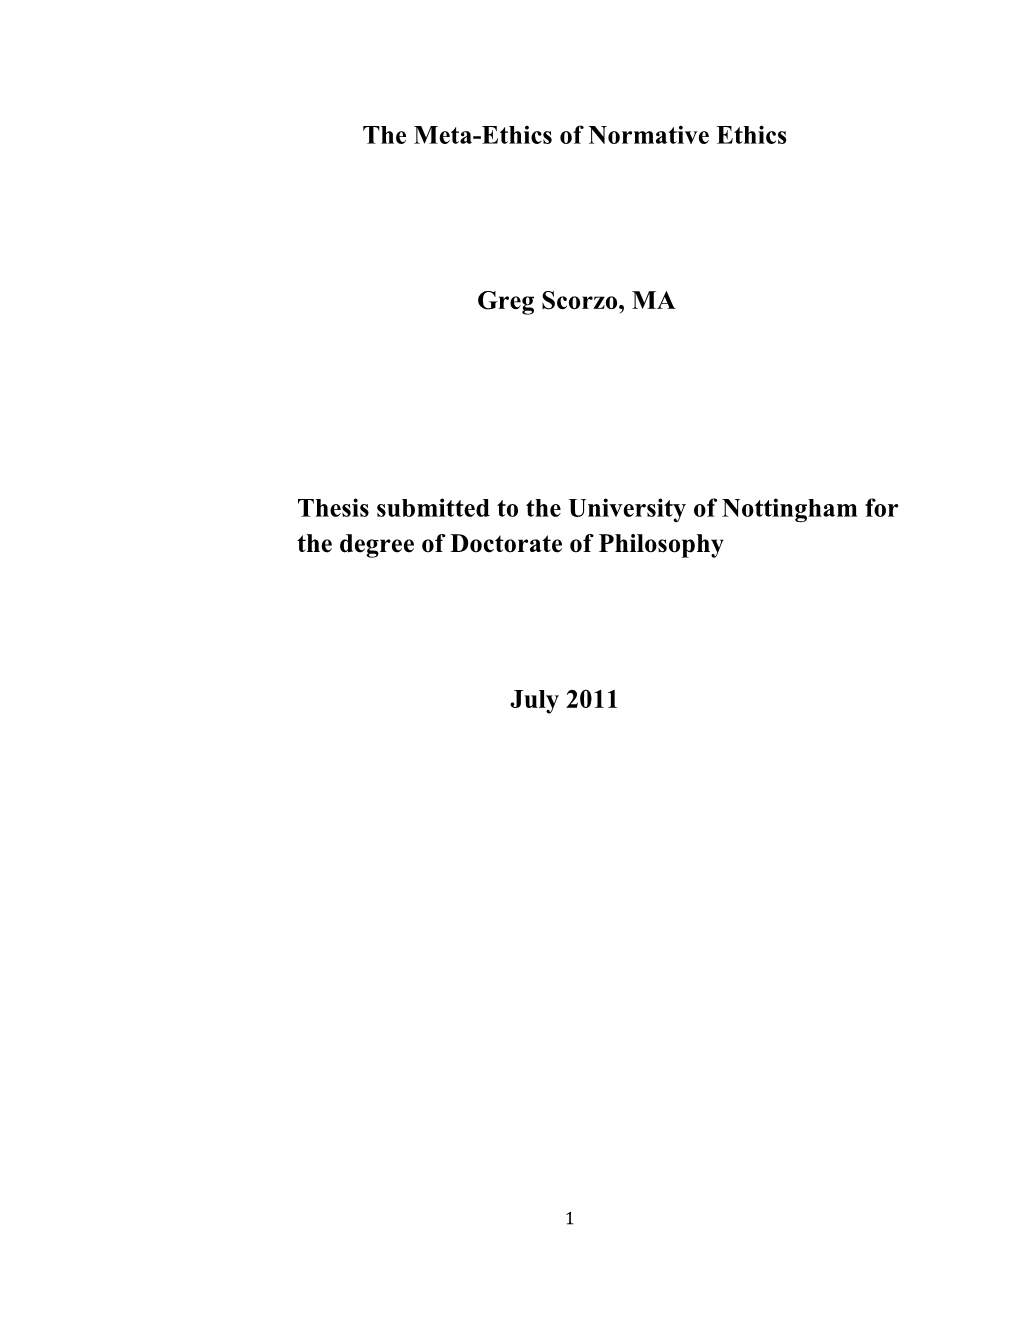 The Meta-Ethics of Normative Ethics Greg Scorzo, MA Thesis Submitted